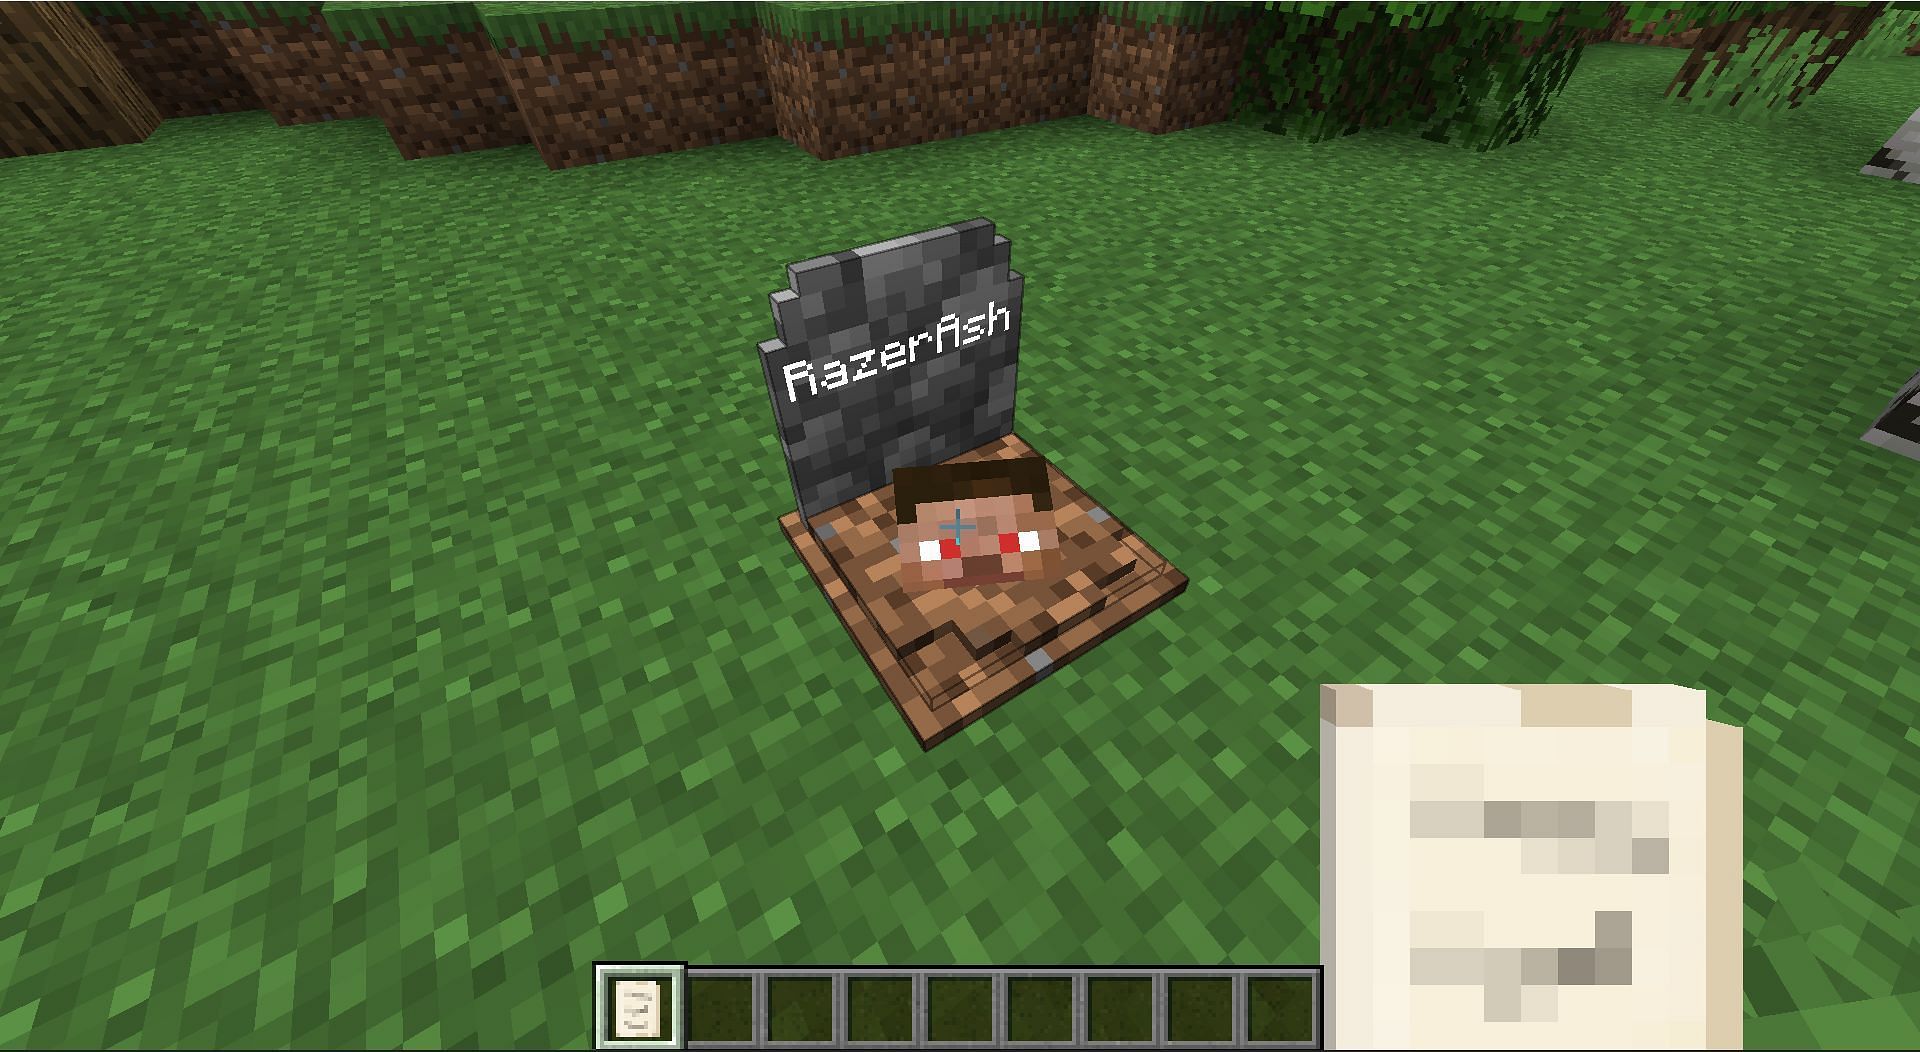 GraveStone mod stores all the items safely (Image via Minecraft 1.19 update)